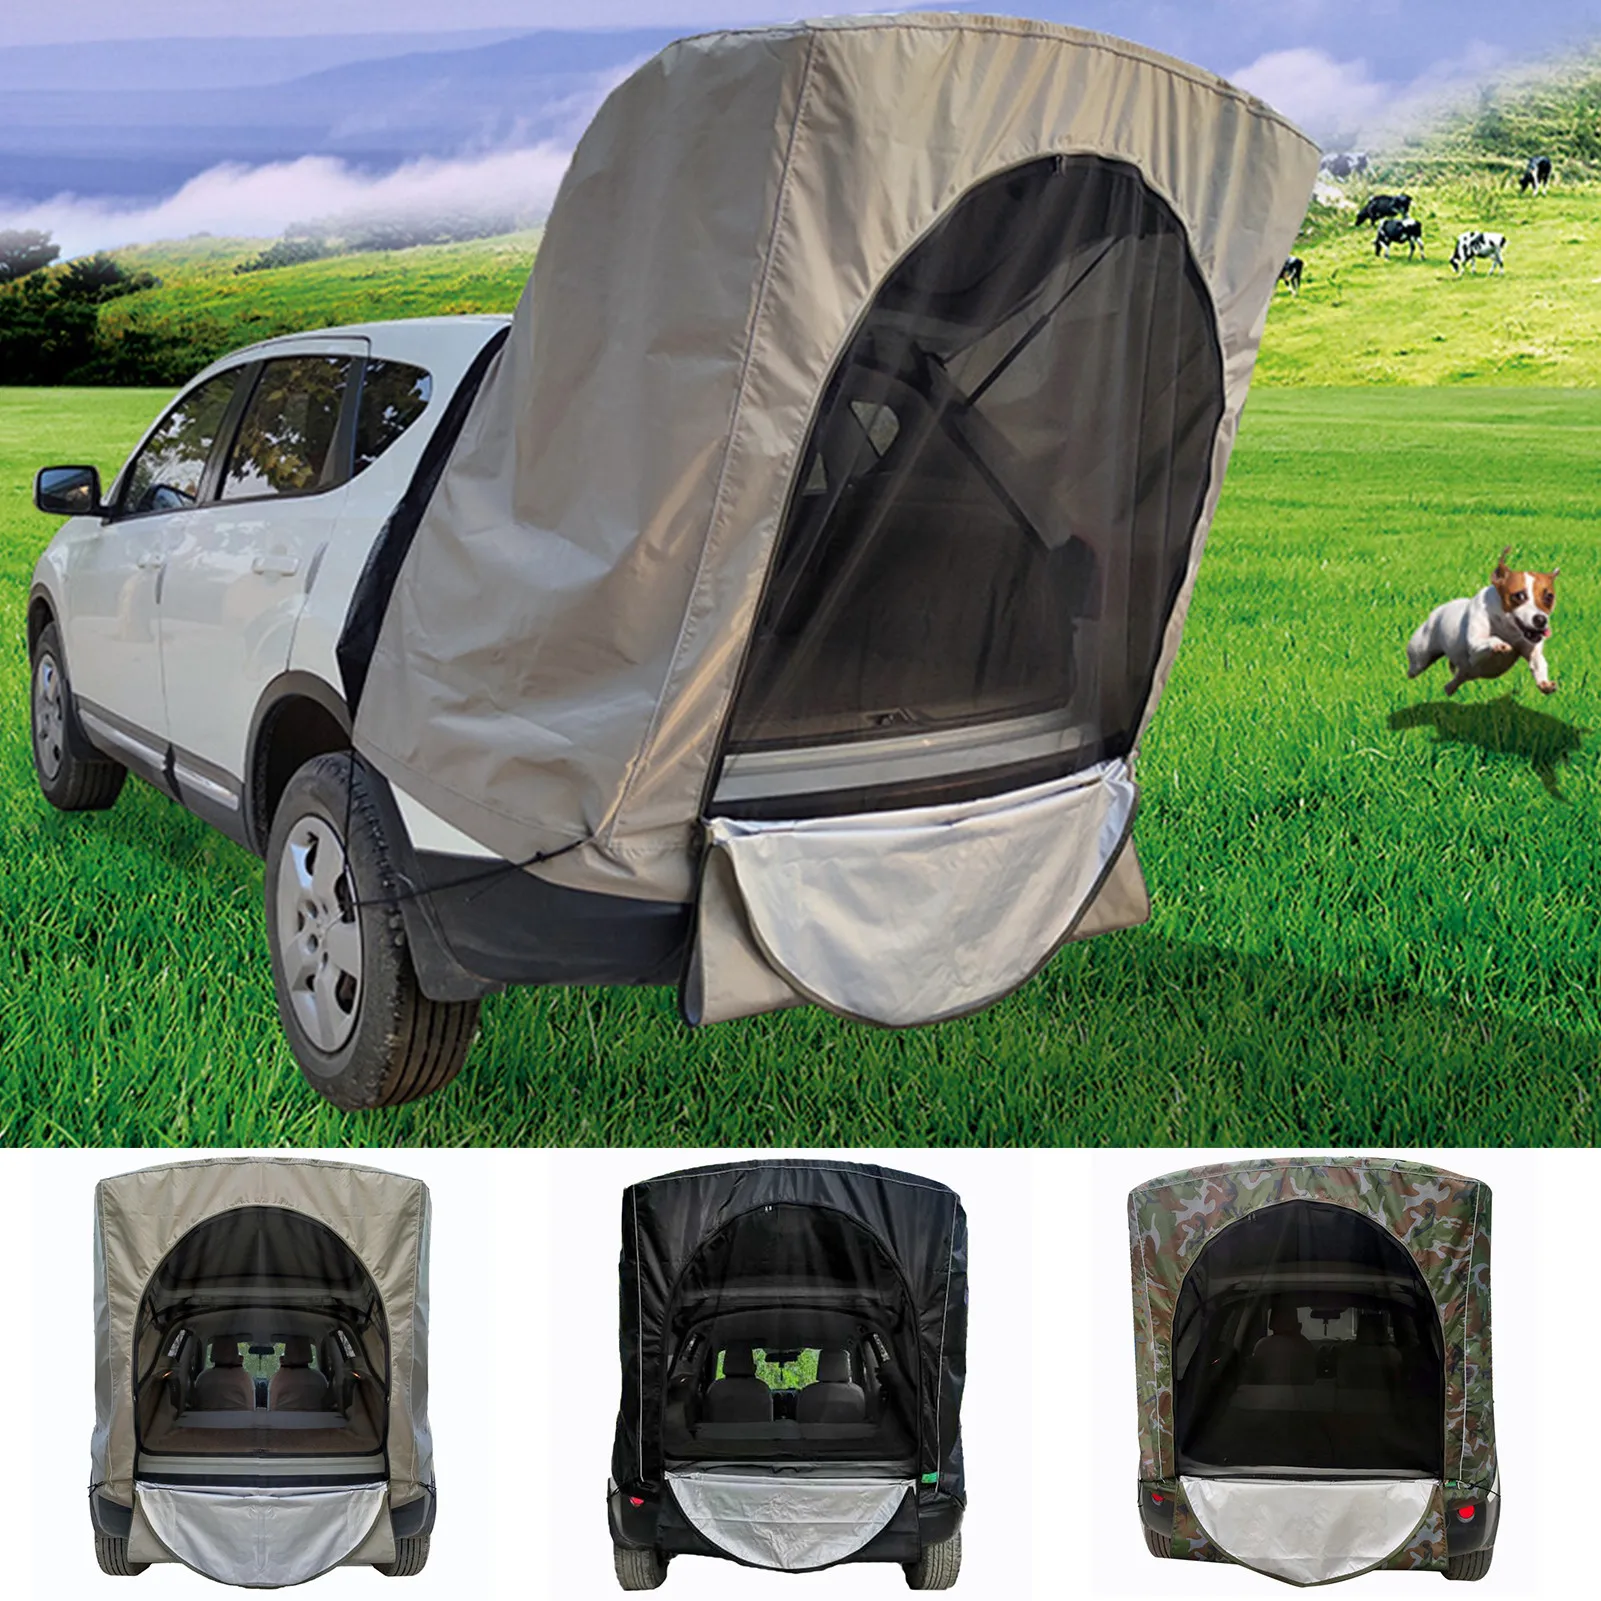 Car Roof Tent Car Awning Outdoor Equipment Camping Tent Canopy Tail Ledger Picnic Awning For Honda